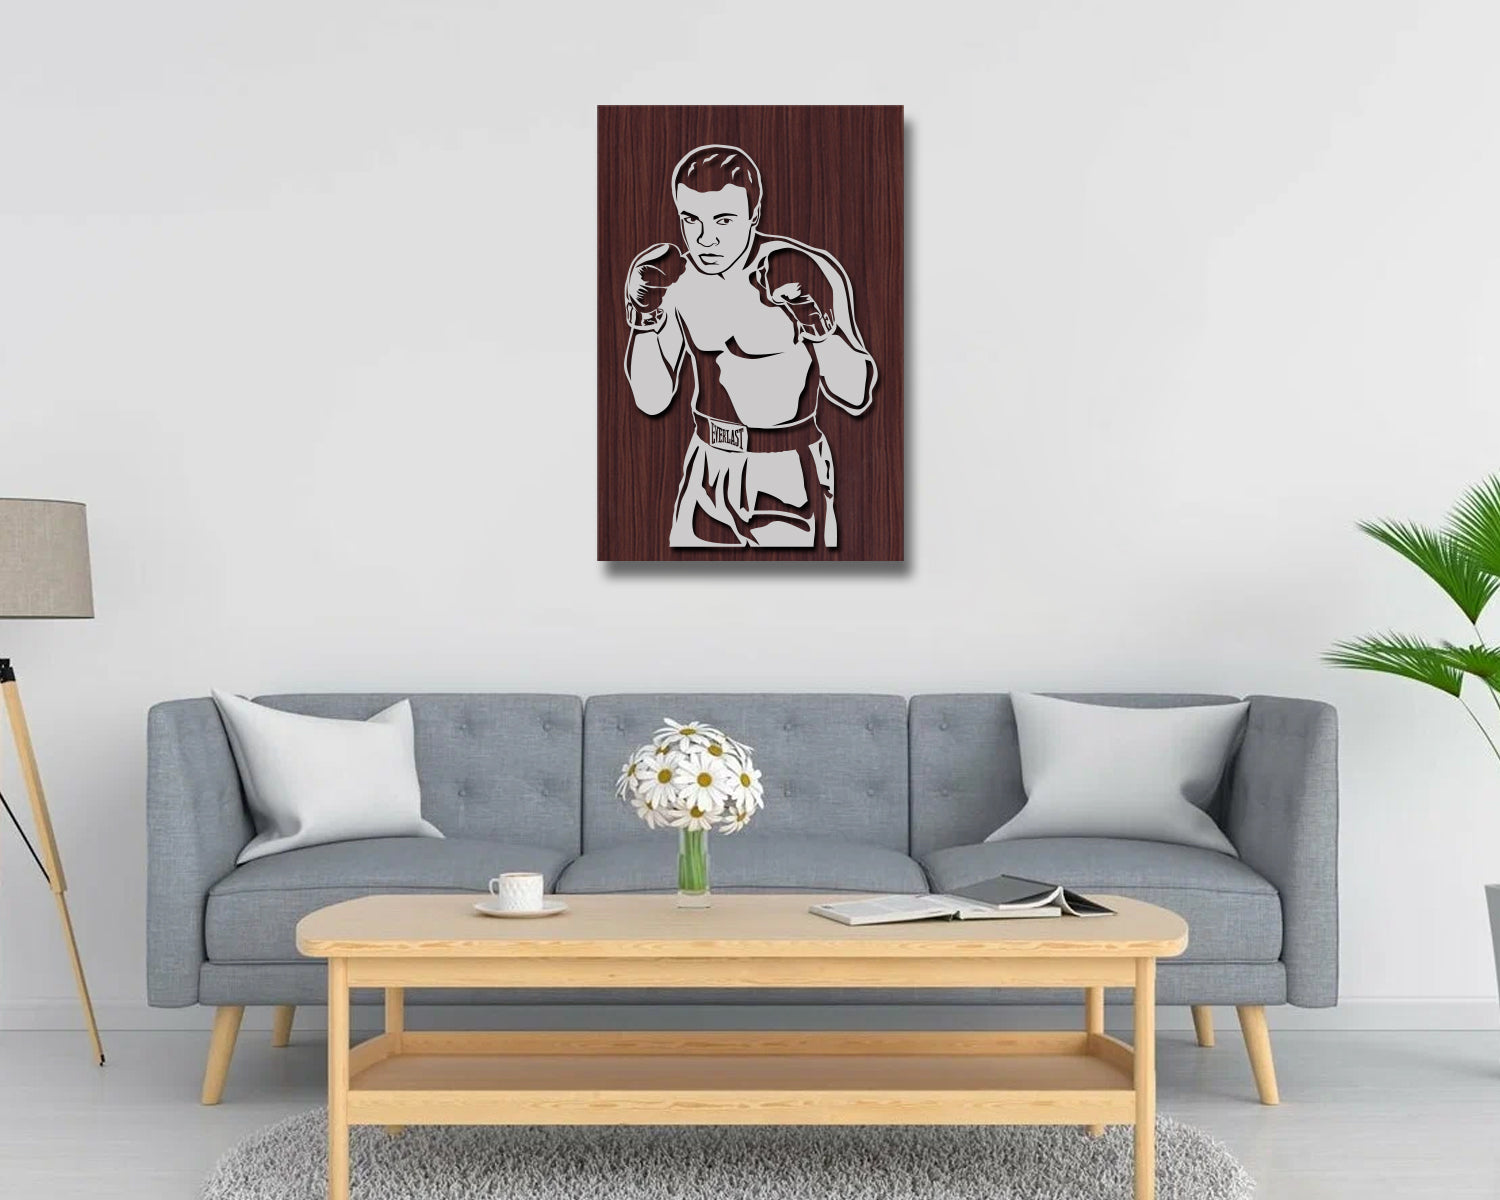 Muhammad Ali LED Wooden Decal 